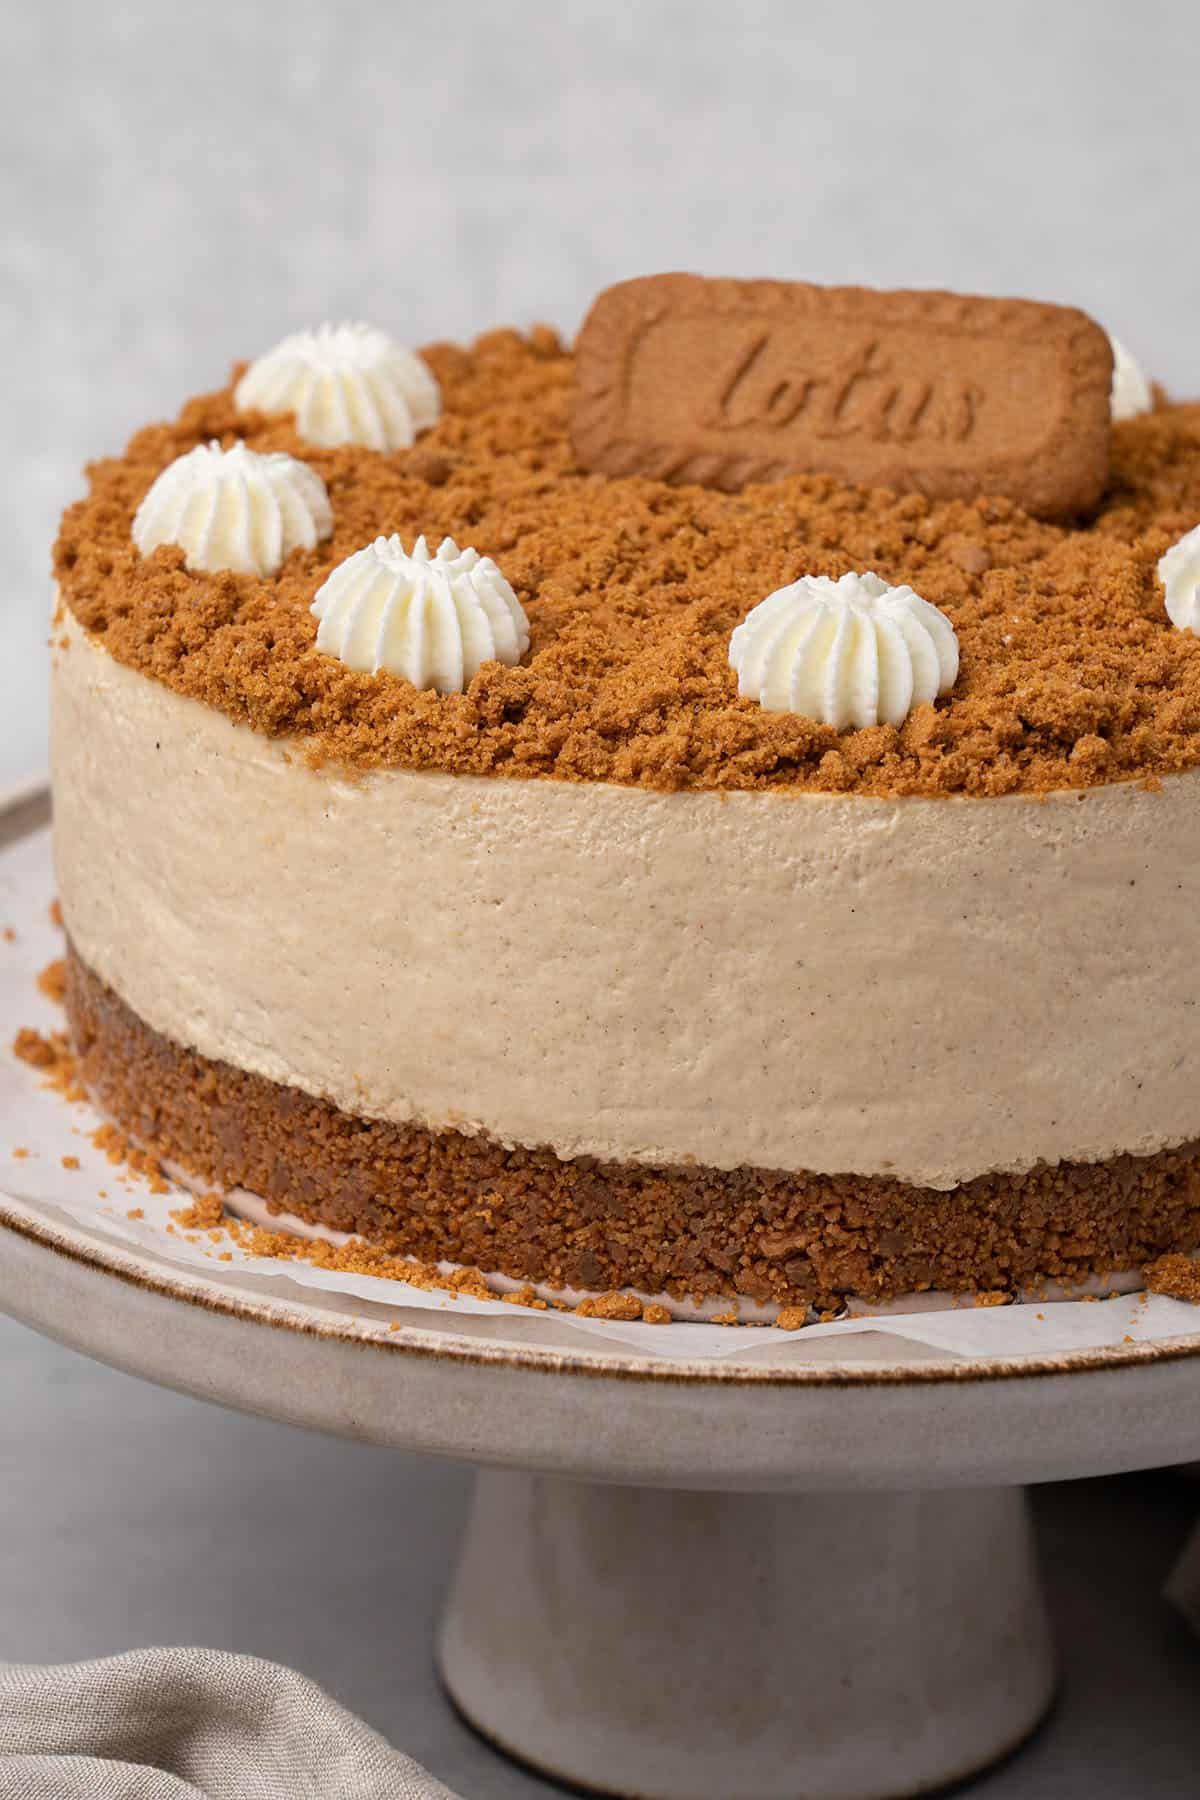 Biscoff cheesecake on a cake stand.